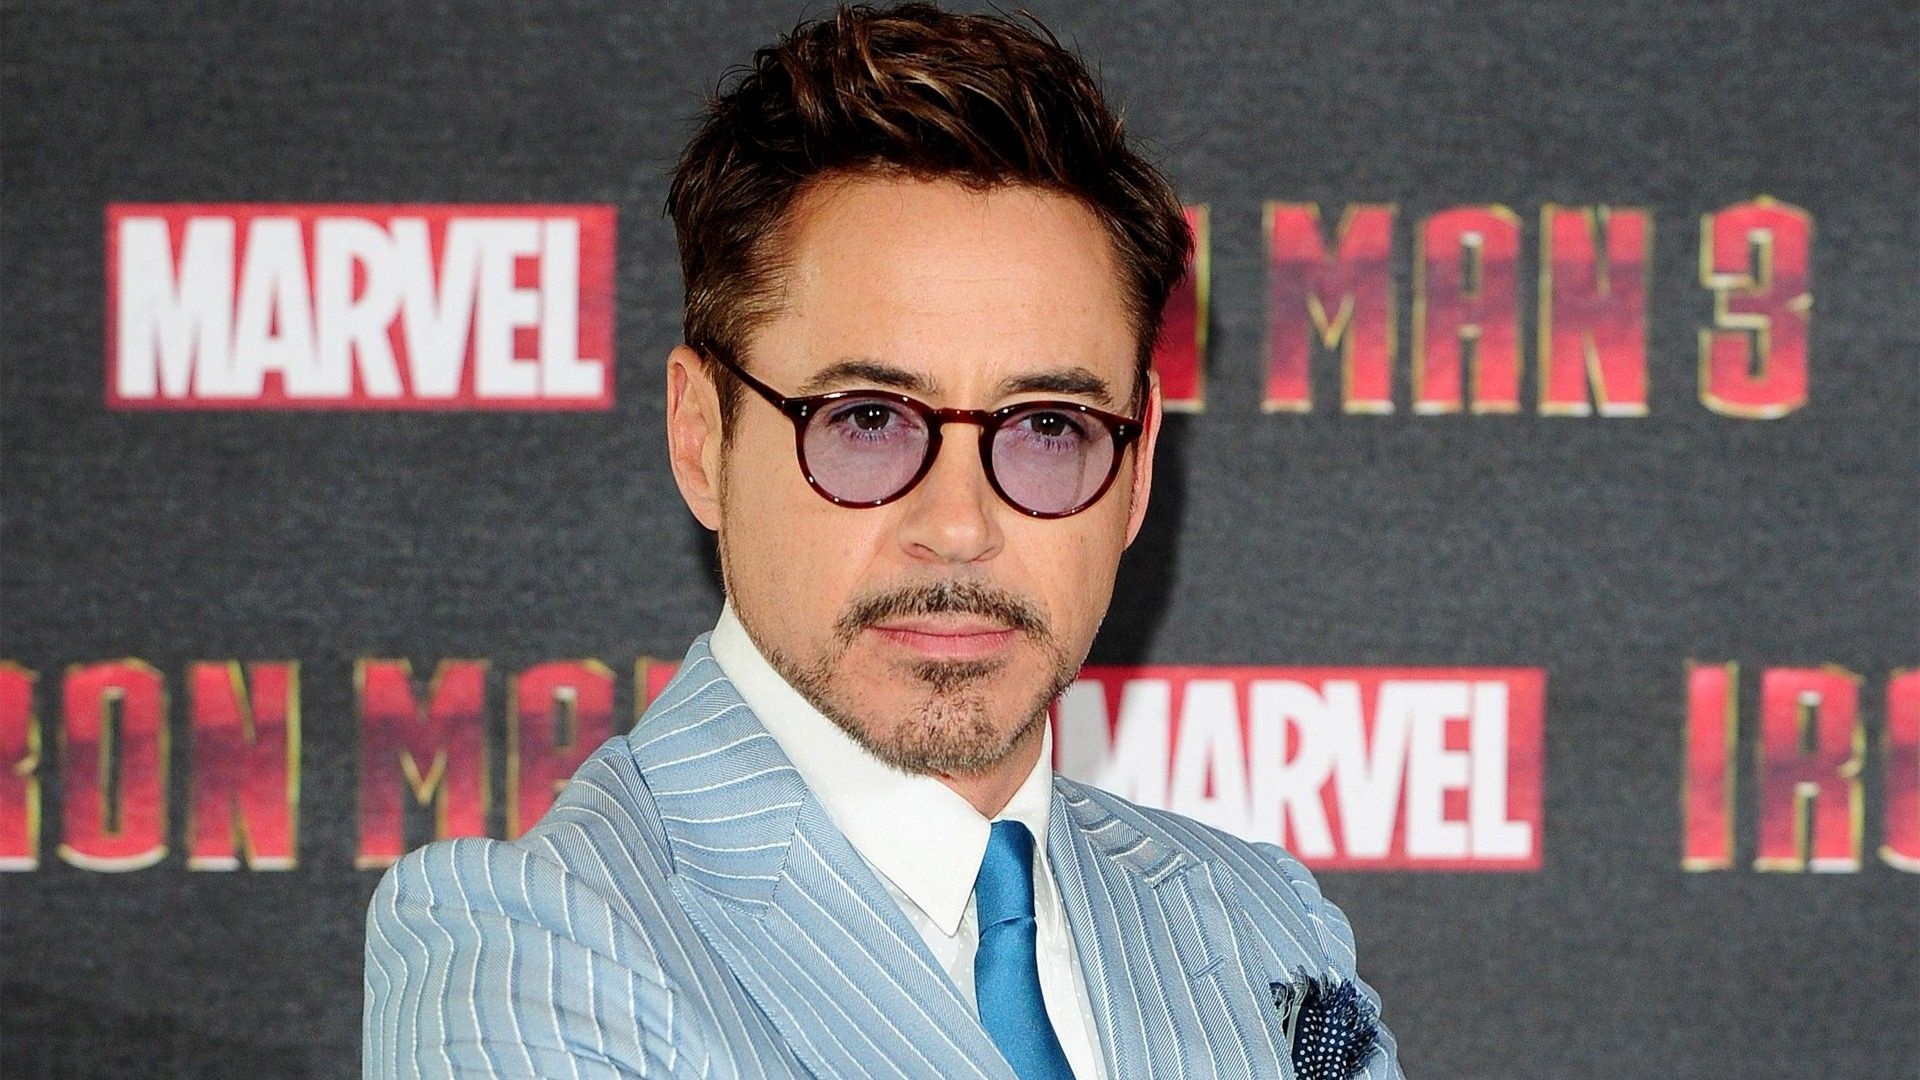 Robert Downey Jr.: Best known for his portrayal of Tony Stark in Iron Man, Marvel. 1920x1080 Full HD Background.